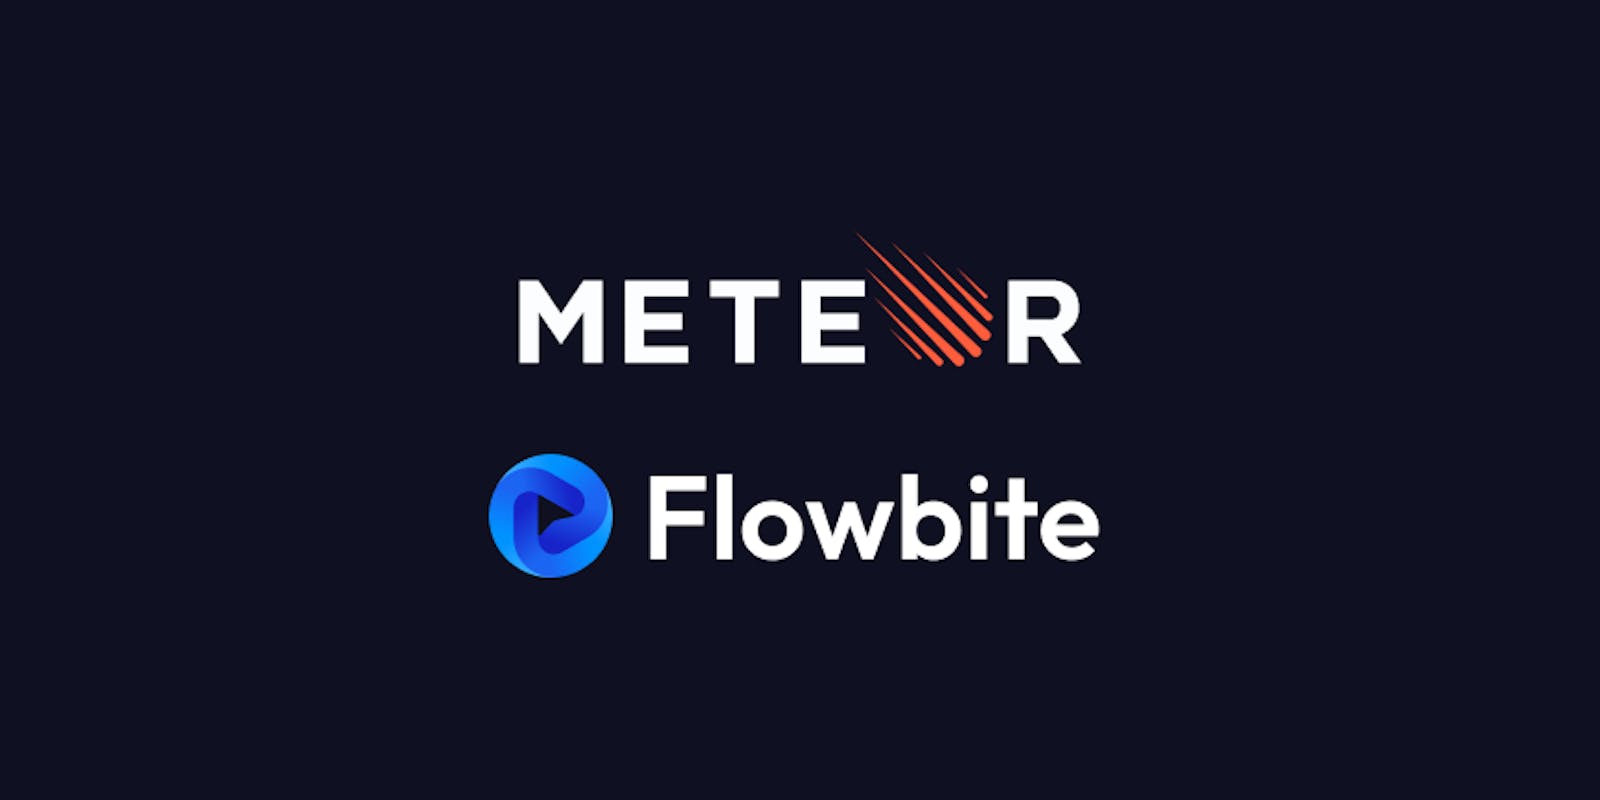 Learn how to install Meteor.js with Tailwind CSS and Flowbite